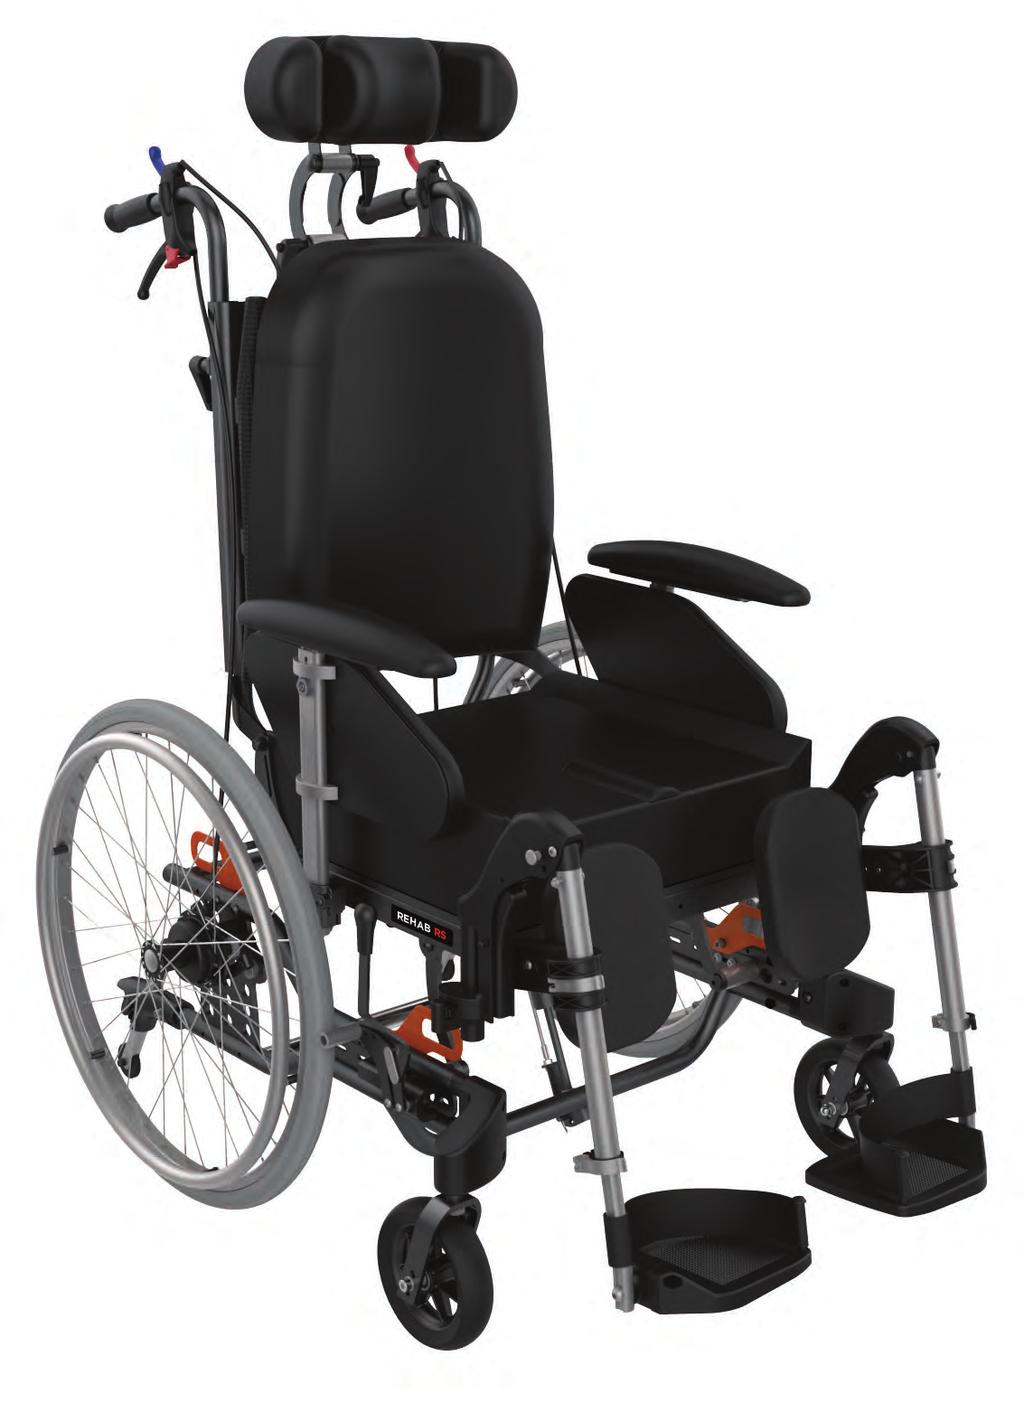 REHAB RS Classic Tilt-In-Space The REHAB RS is an ideal solution for Aged Care and Community users who requires increased postural support and bodyweight redistribution.